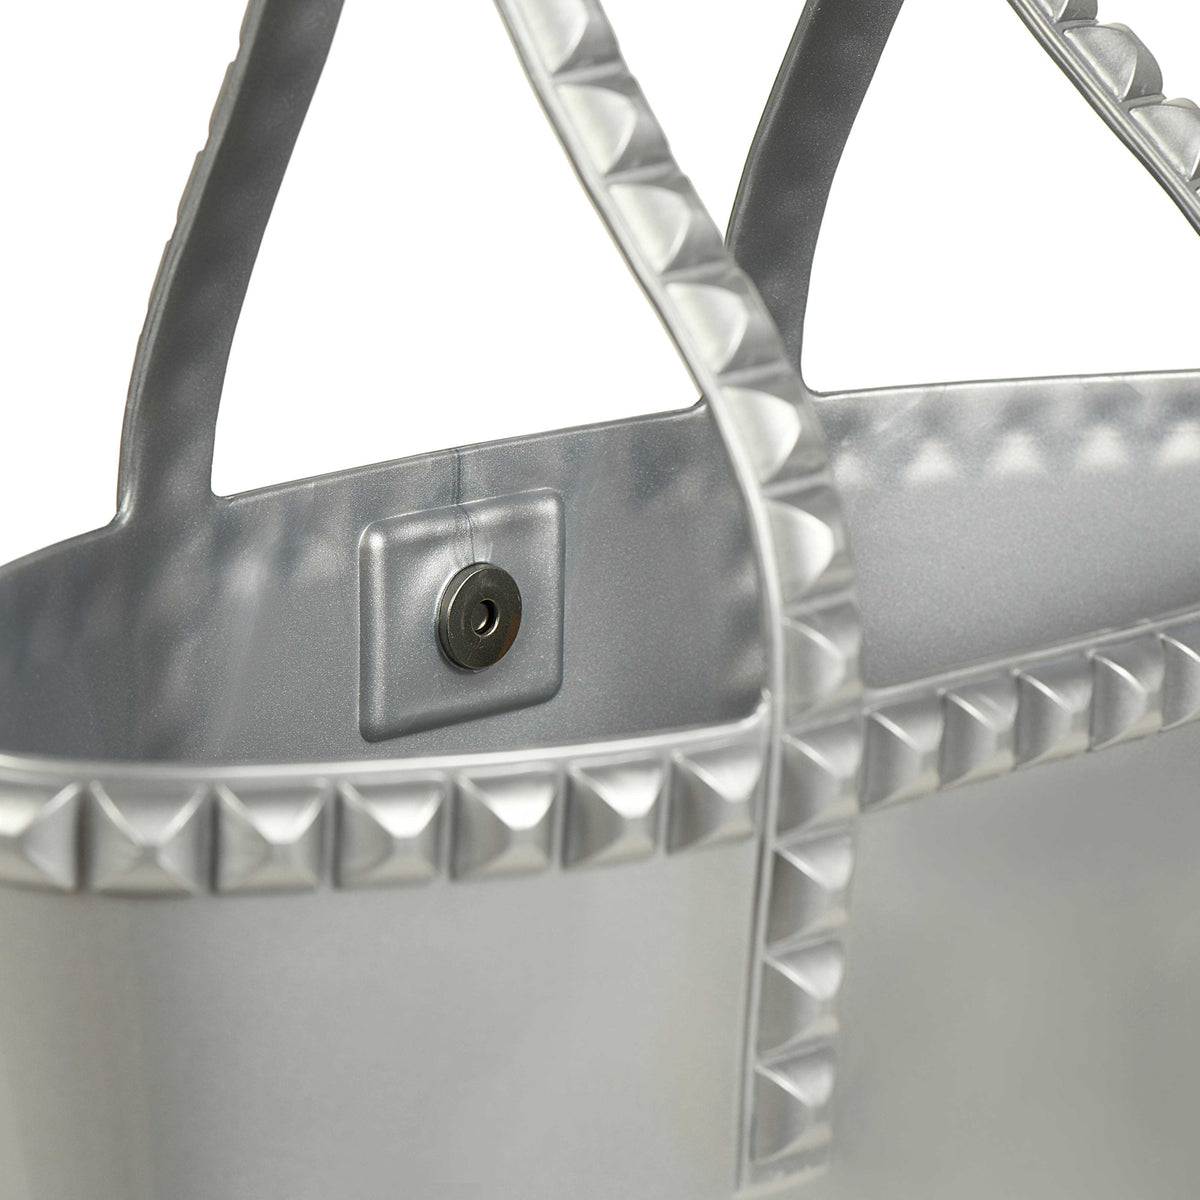 Sustainable Carmen Sol jumbo studded jelly purse in color silver